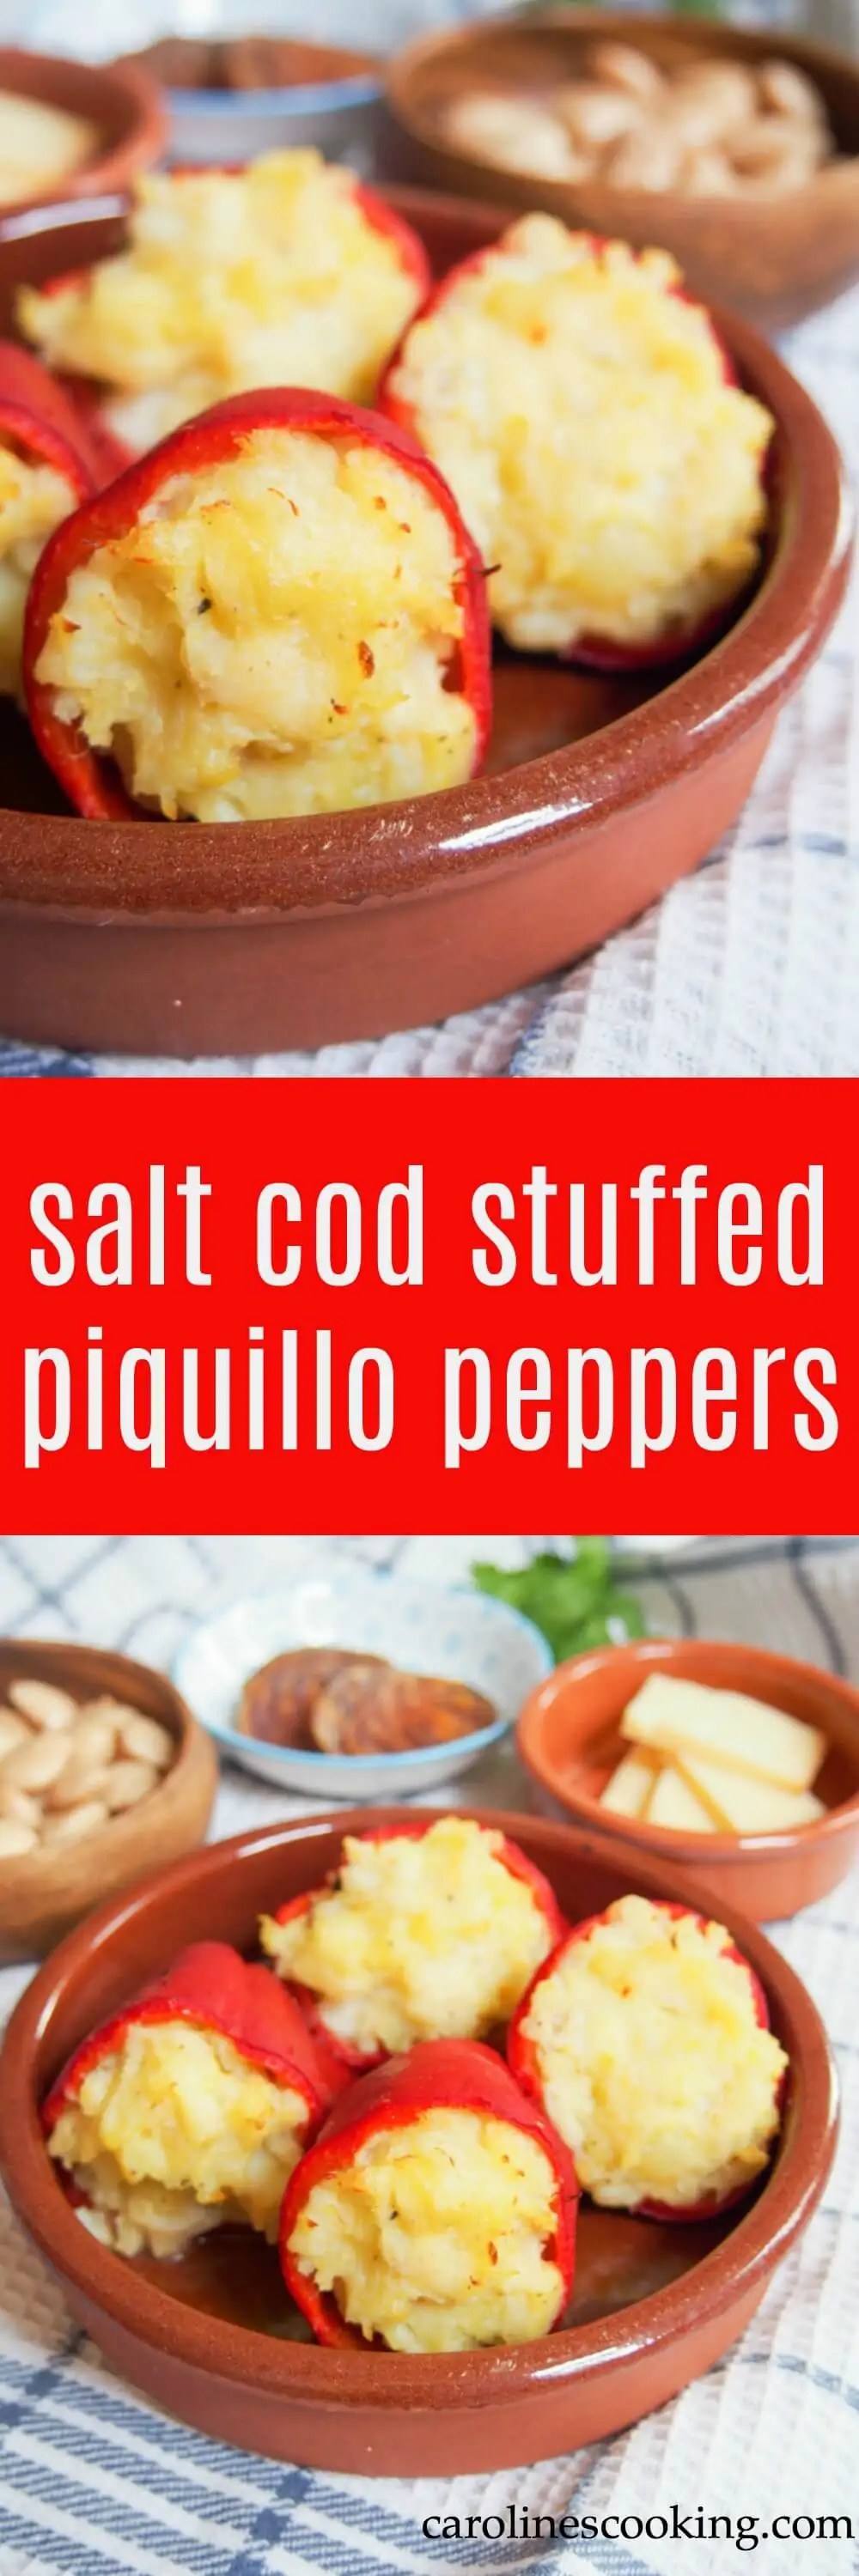 Salt cod stuffed piquillo peppers are comfort food in tapas form - the potato and salt cod filling is smooth and packed with flavor. They make a great appetizer or serve as part of a tapas meal.